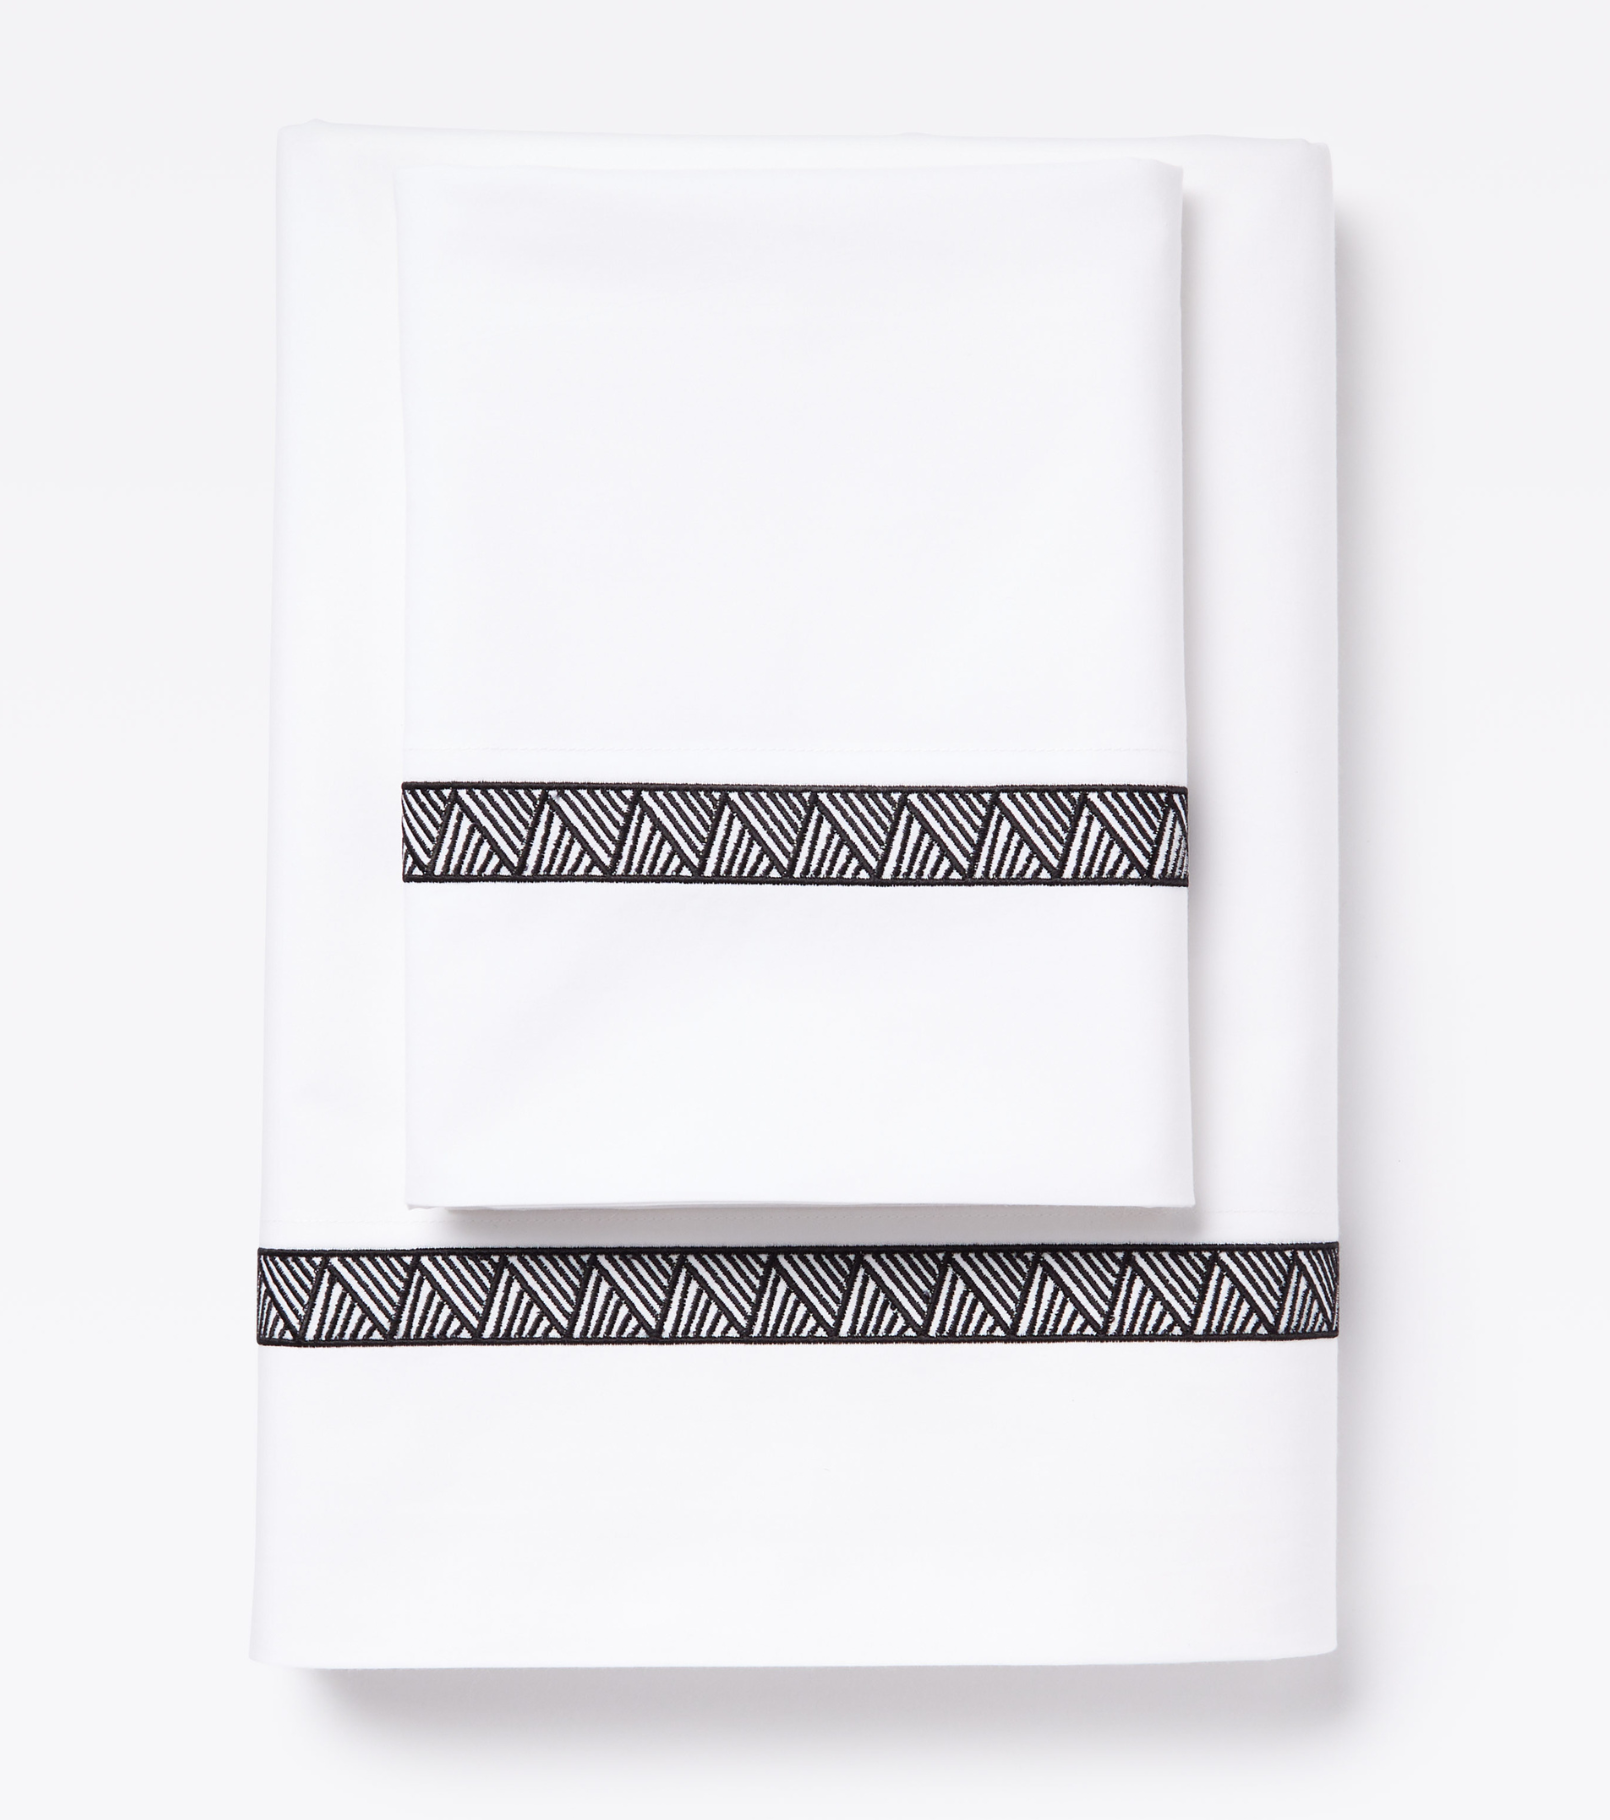 Averylily Weave Sheet Set in White with embroidered trim in Basalt. 510-thread count pure cotton percale.